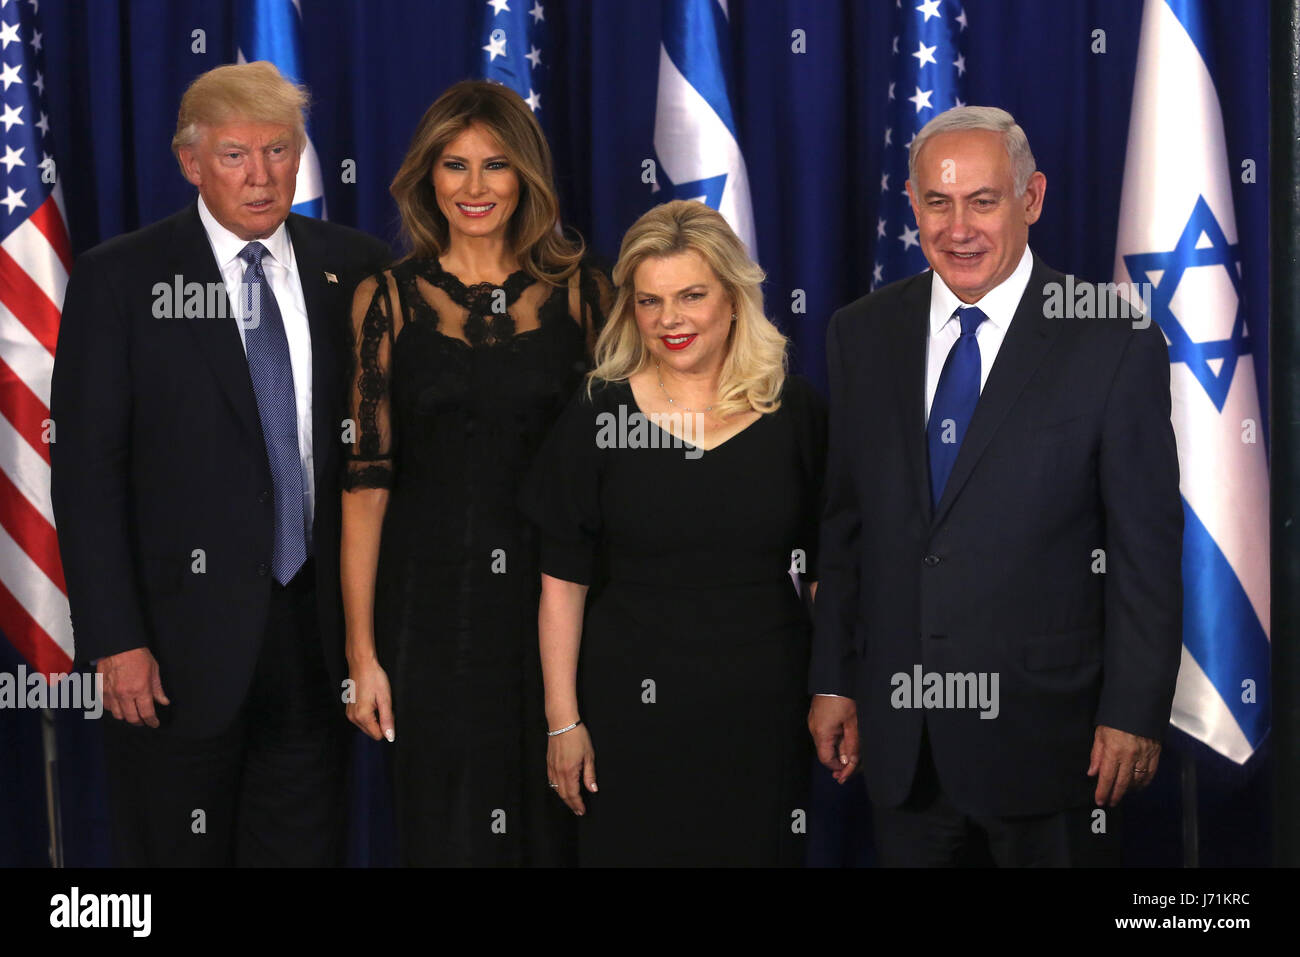 Jerusalem, R) and his wife Sara Netanyahu in Jerusalem. 22nd May, 2017. U.S. President Donald Trump (1st, L) and his wife Melania Trump (2nd L) pose for photos with Israeli Prime Minister Benjamin Netanyahu (1st, R) and his wife Sara Netanyahu in Jerusalem, on May 22, 2017. Speaking on the first day of his visit to Israel and the West Bank, U.S. President Donald Trump urged Israeli Prime Minister Benjamin Netanyahu to start a 'new partnership' with the Arab world. Credit: JINI/POOL/Marc Israel Sellem/Xinhua/Alamy Live News Stock Photo